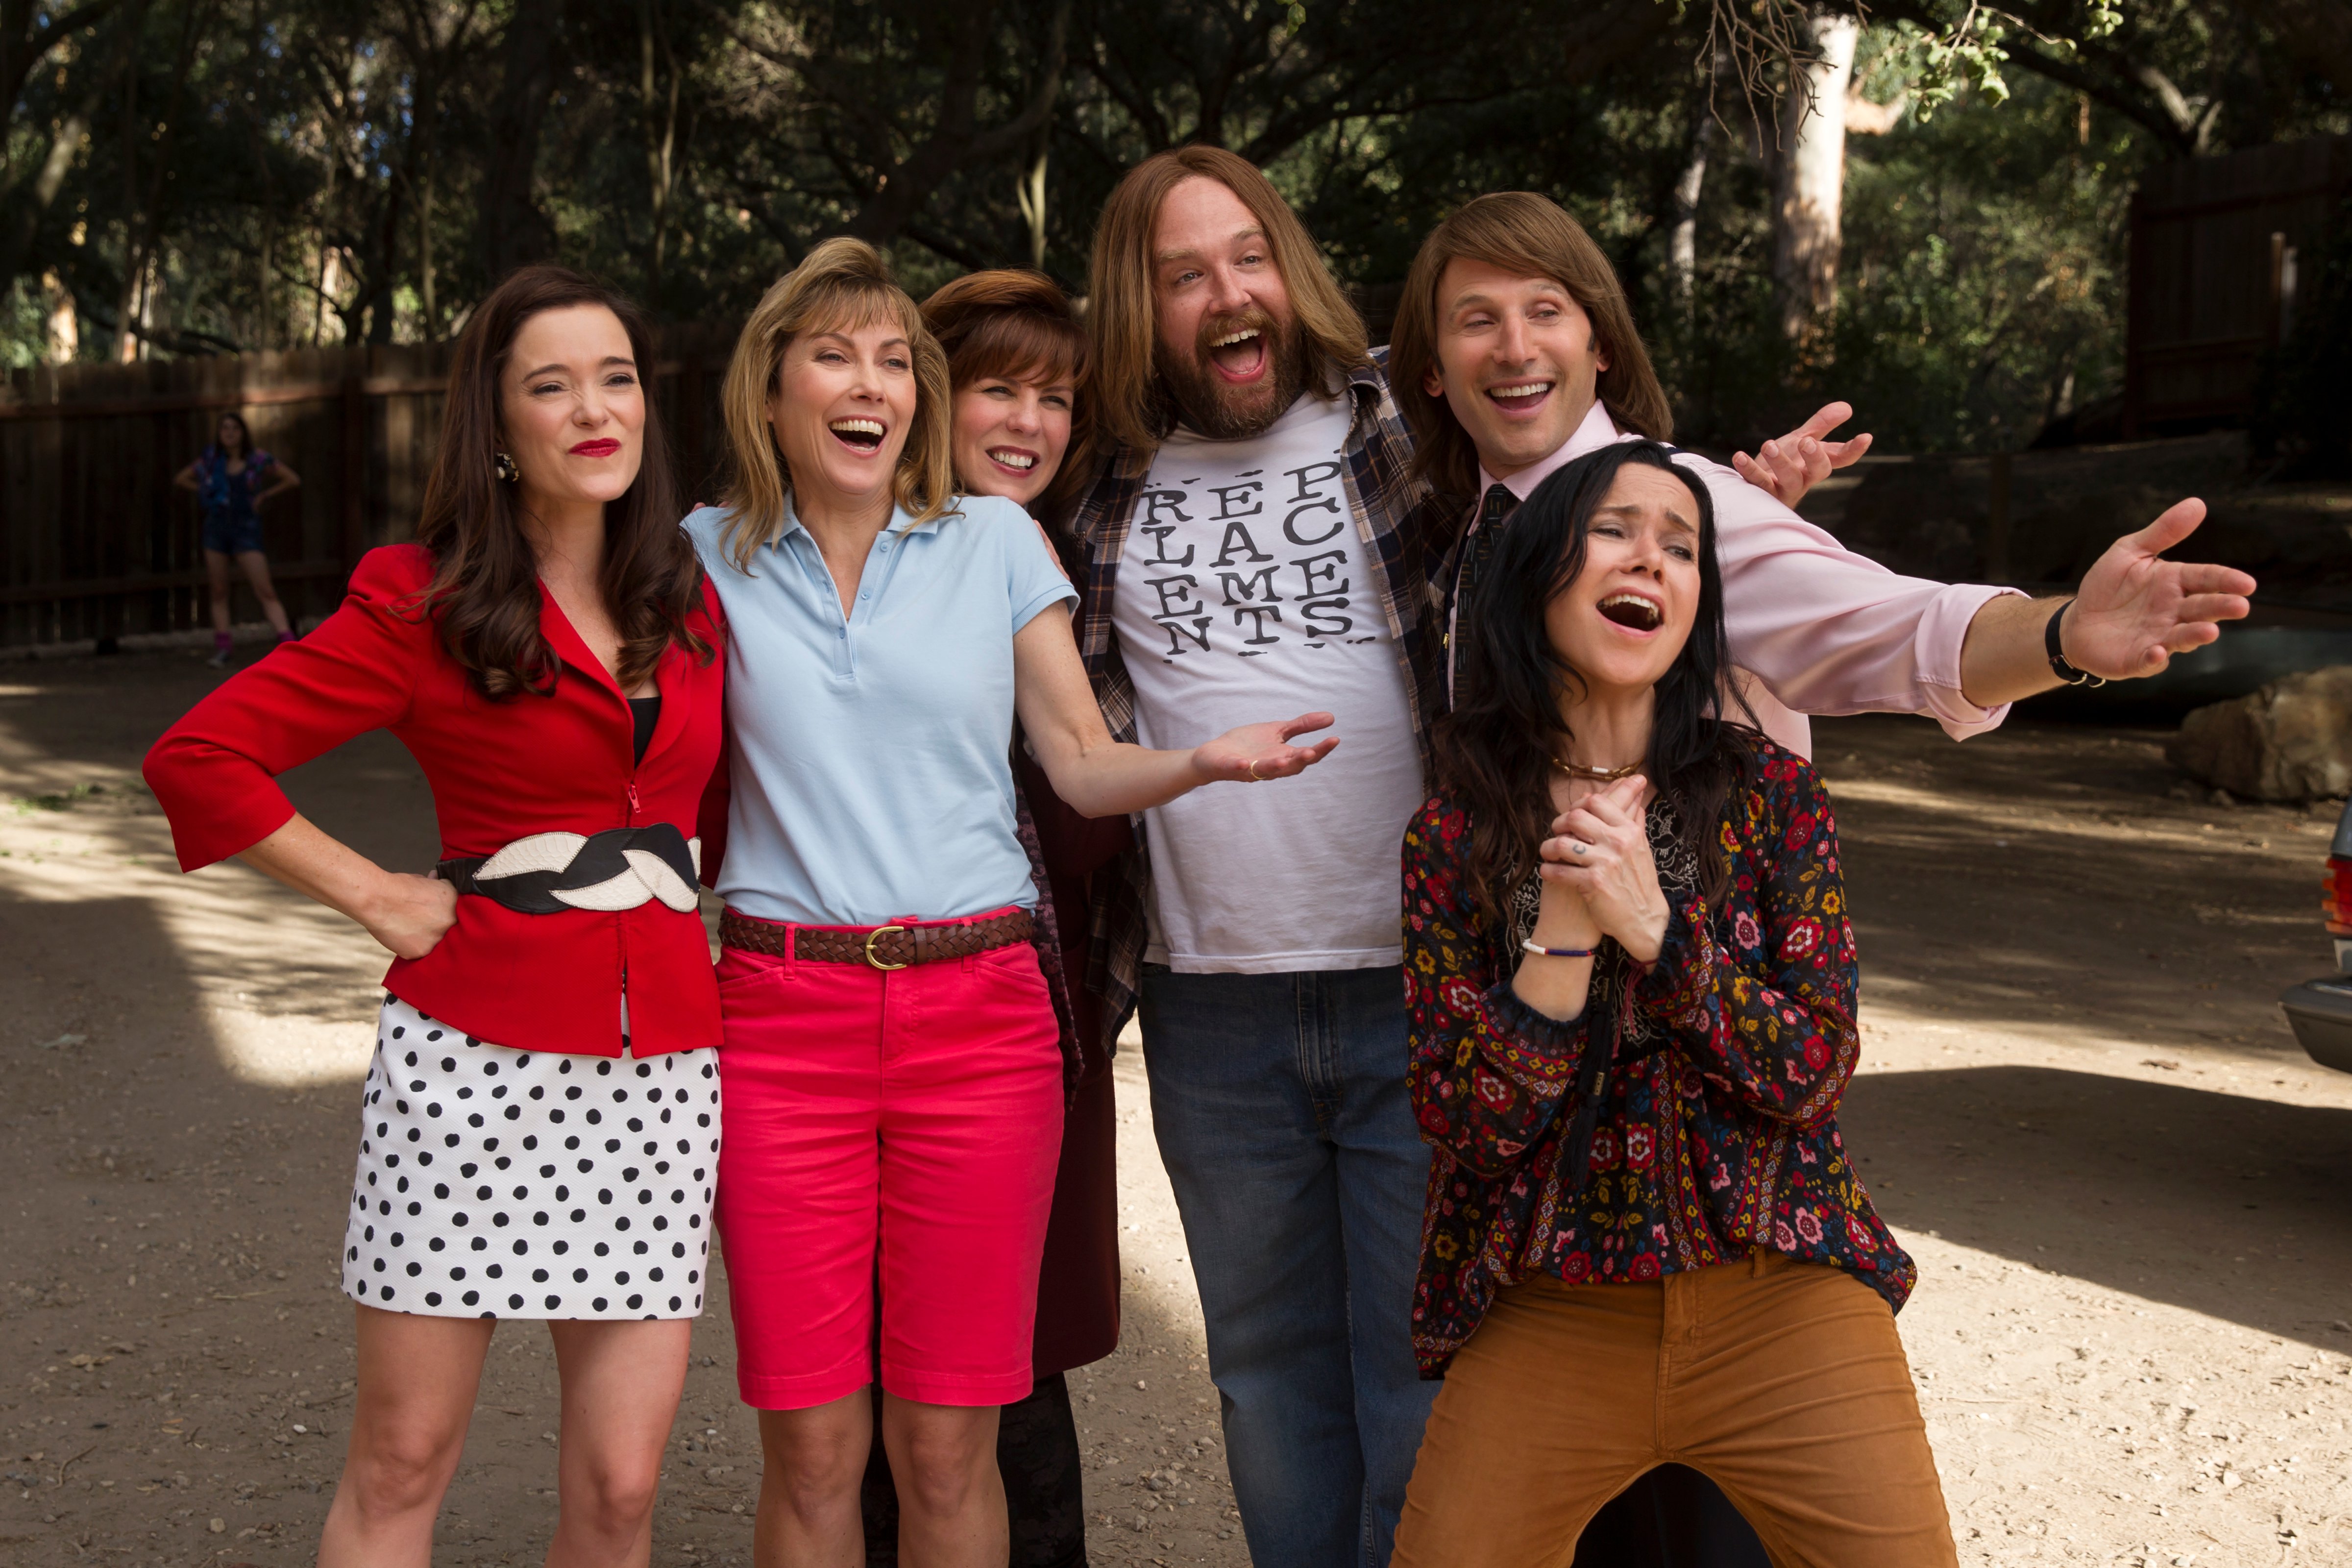 The "class of '81" reunites for their 10-year camp reunion in <em>Wet Hot American Summer: Ten Years Later</em> (Saeed Adyani/Netflix)